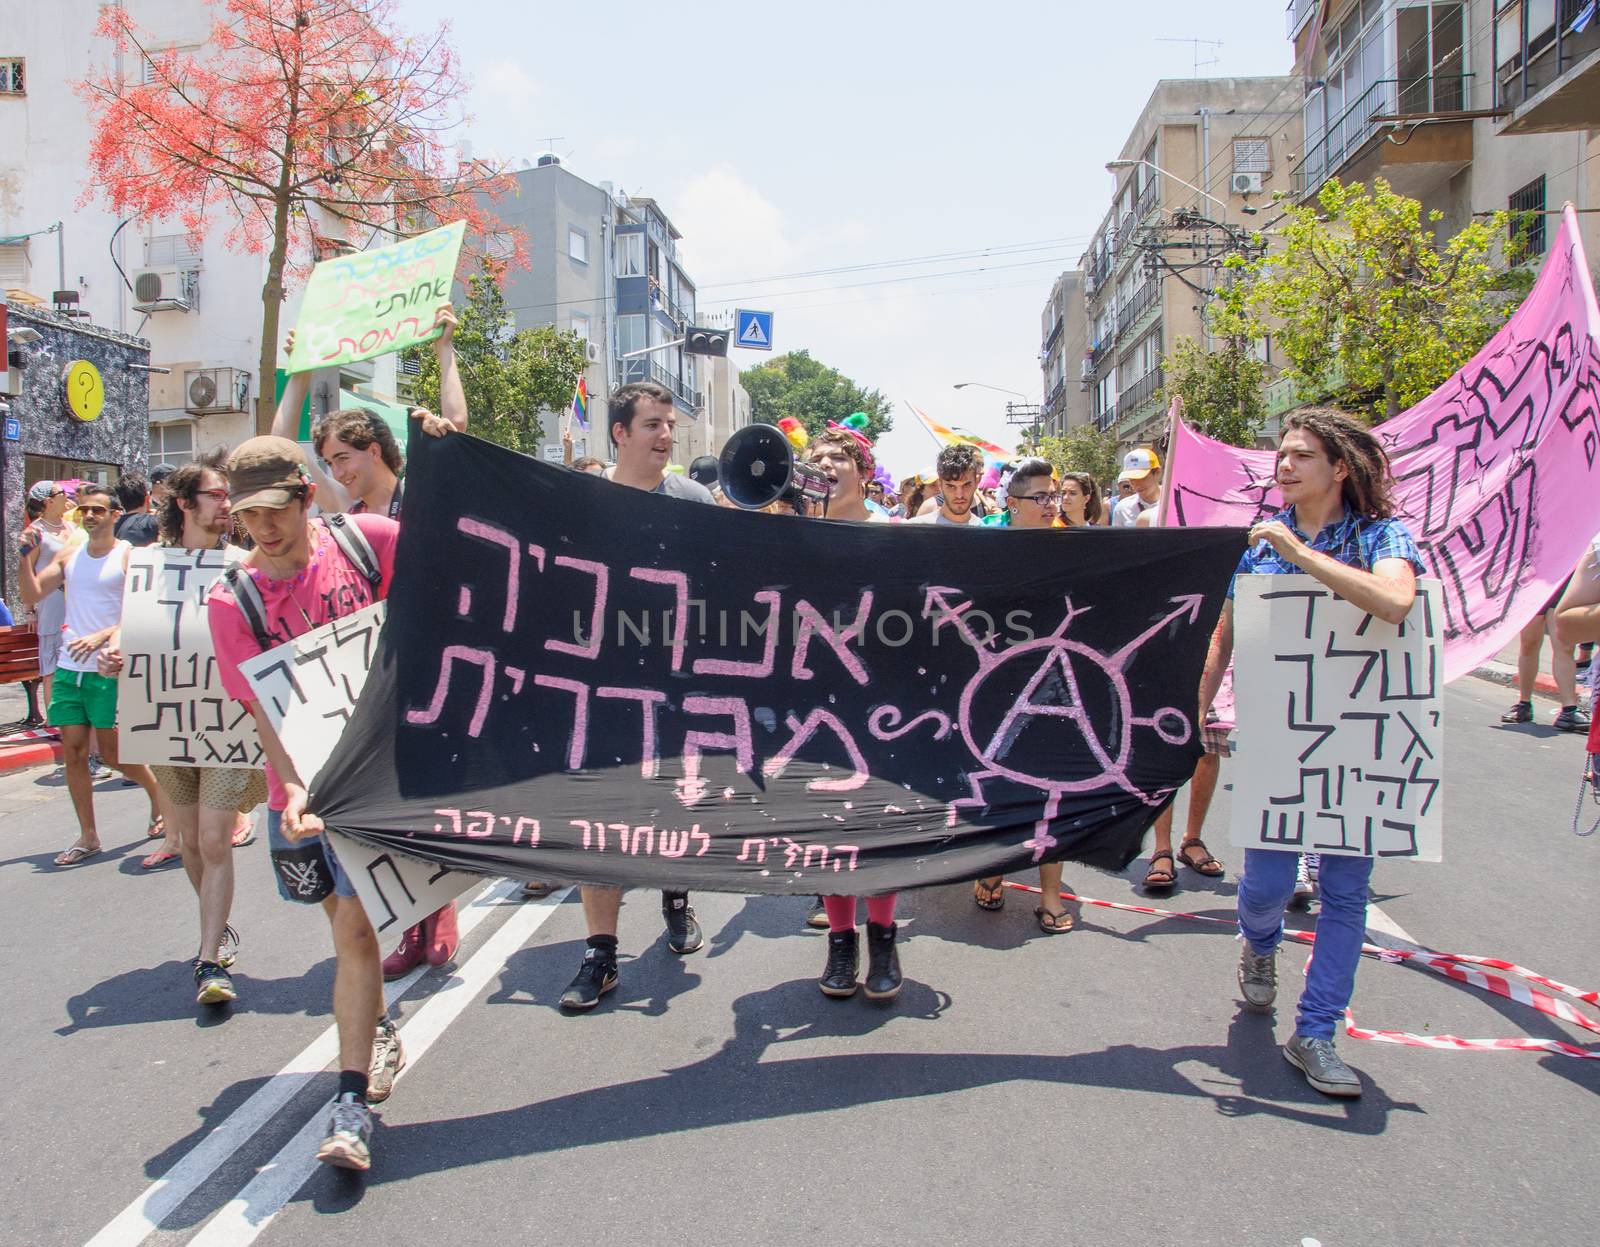 TEL-AVIV - JUNE 13, 2014: A group of anarchists march in the Pride Parade in the streets of Tel-Aviv, Israel. The pride parade is an annual event of the gay community